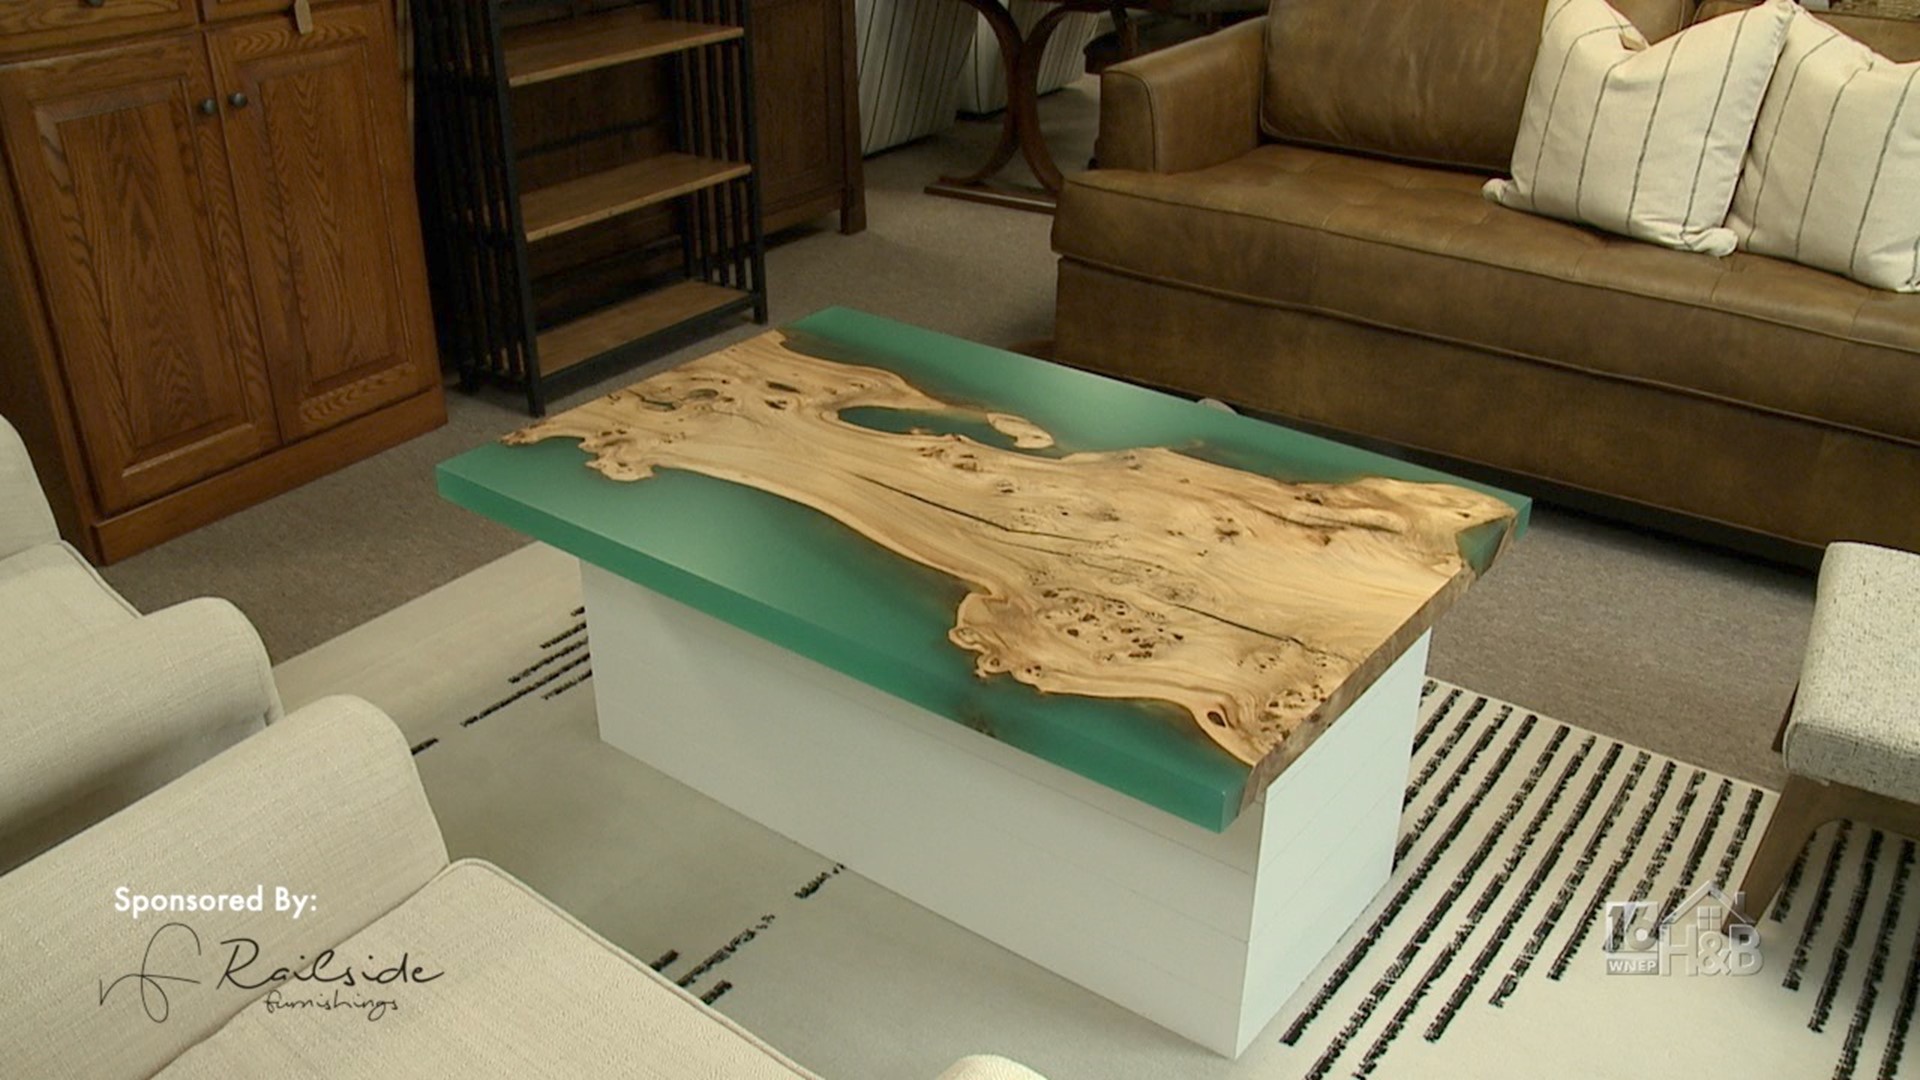 How To Make A Live Edge Table With Railside Furnishings